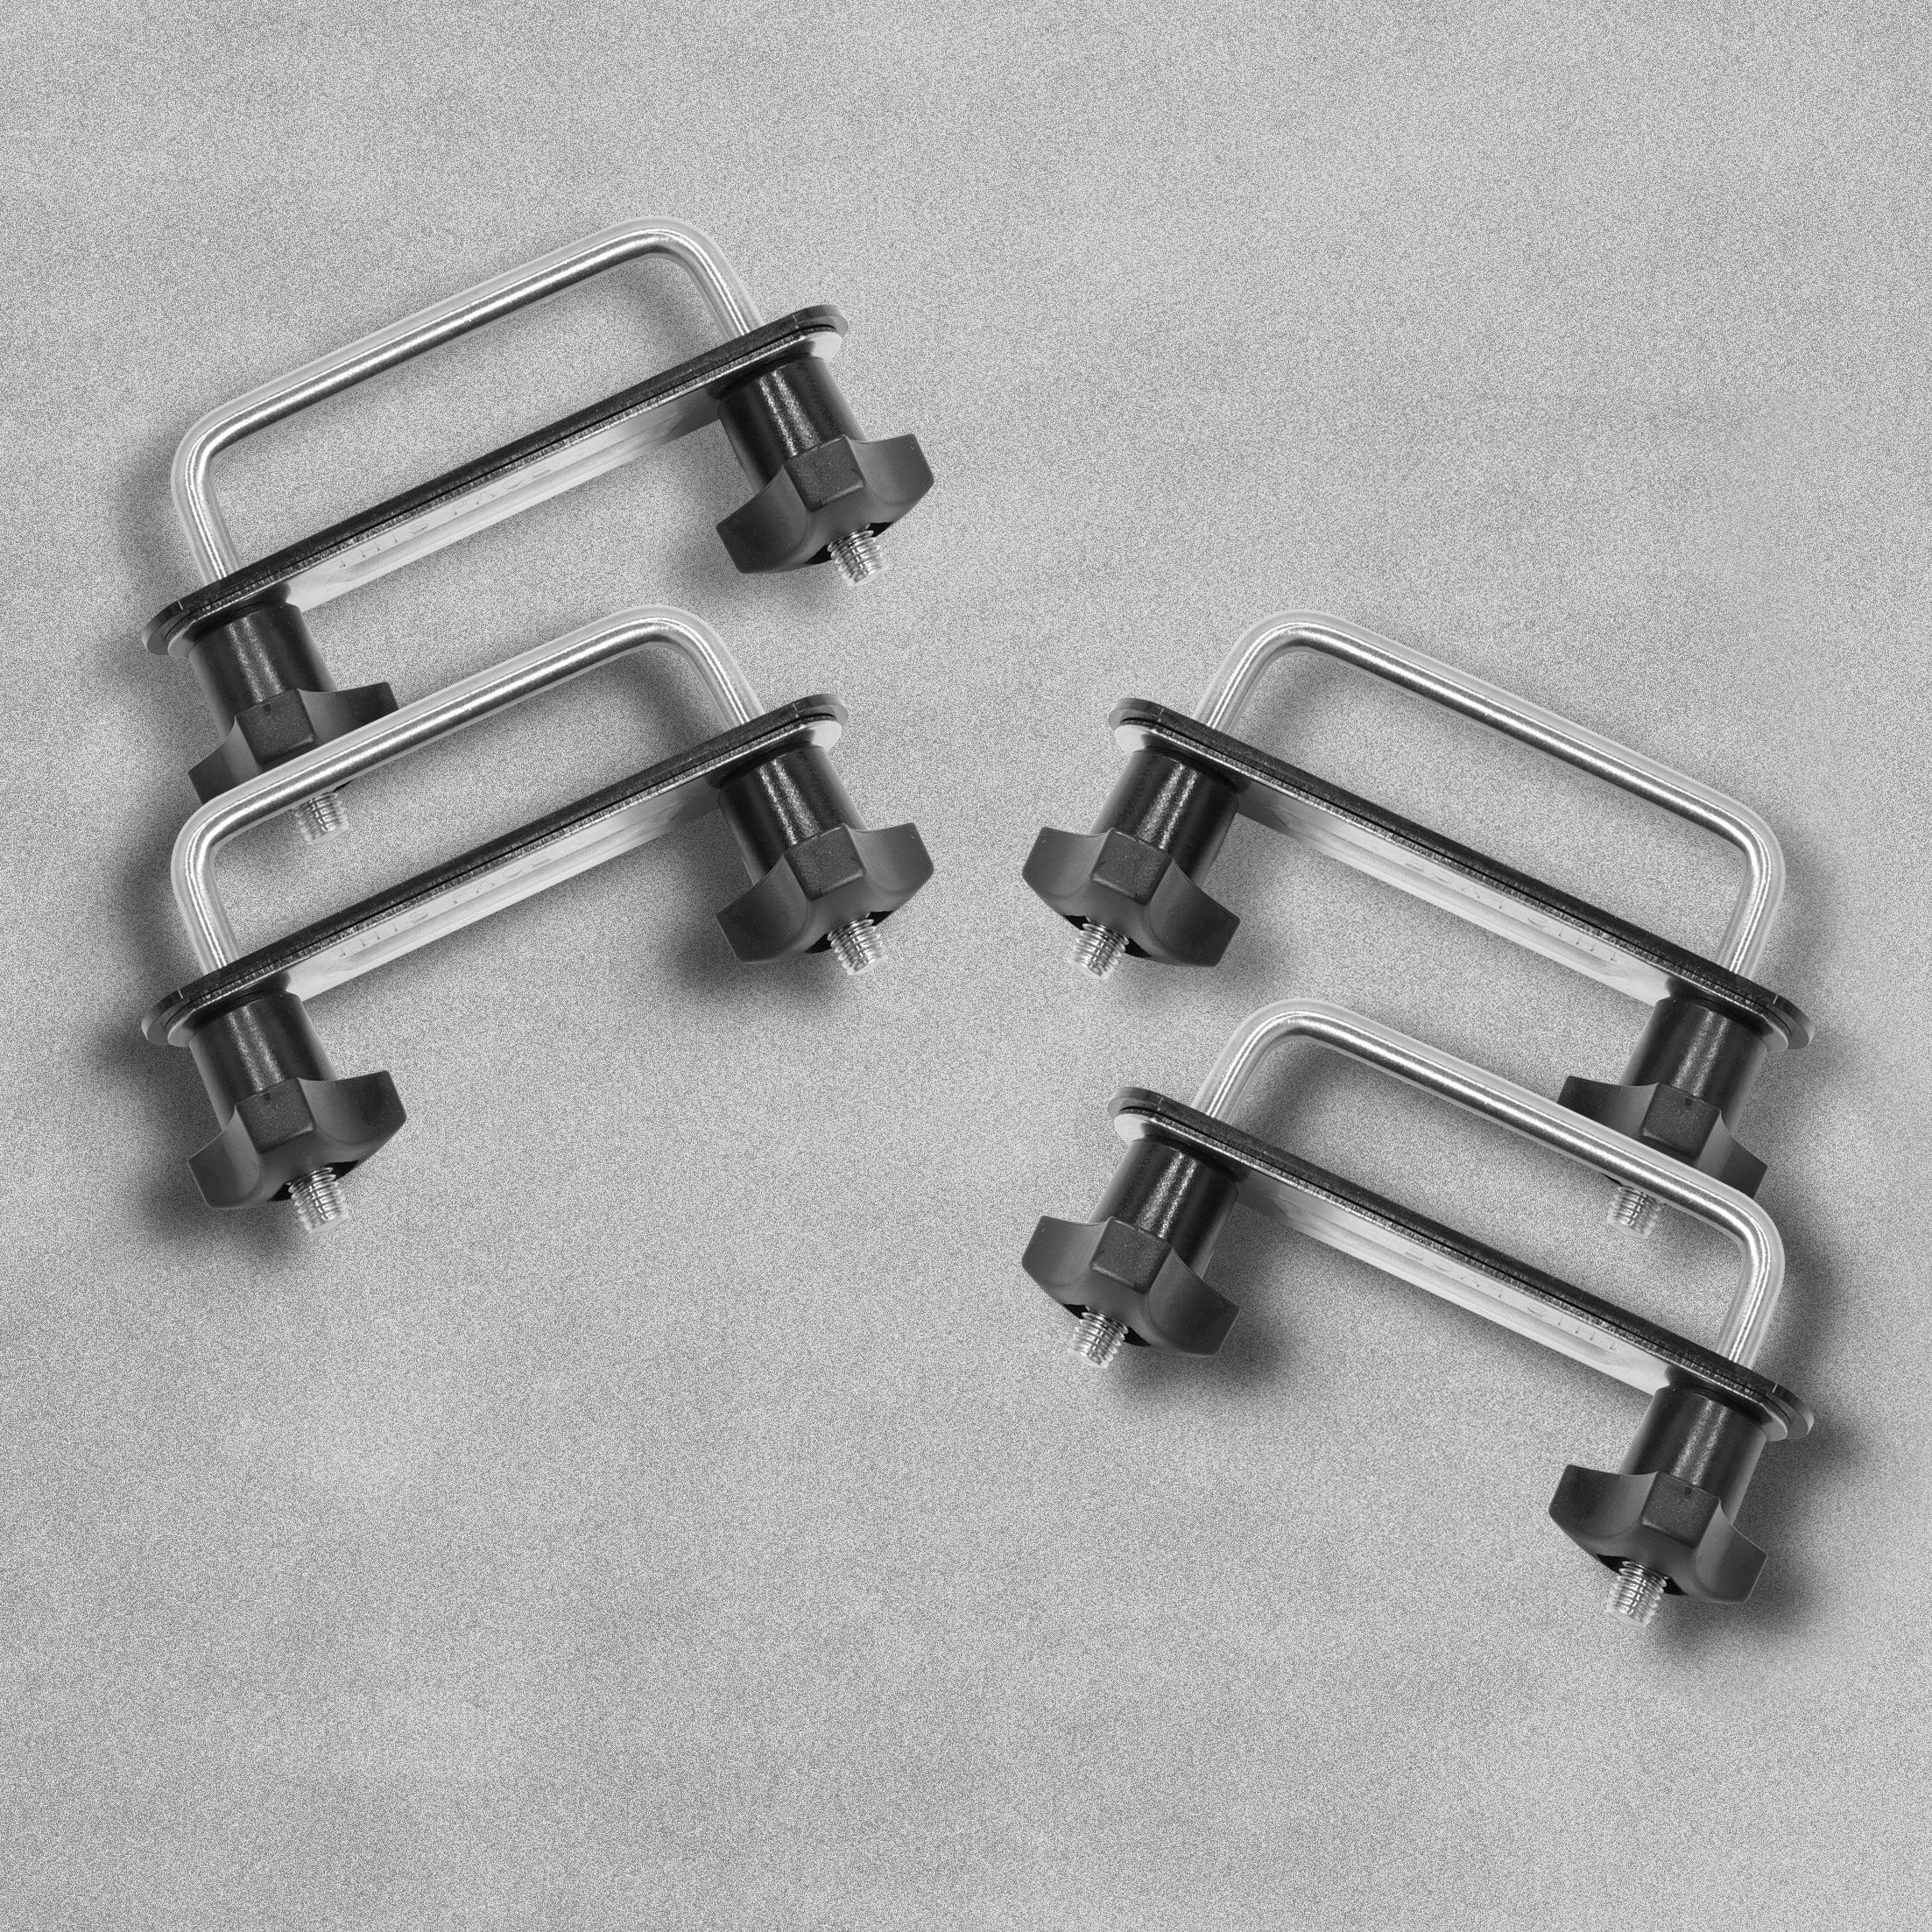 4x U-Bolts Clamp Stainless Steel Universal Roof Box Car Van Mounting  Fitting Kit